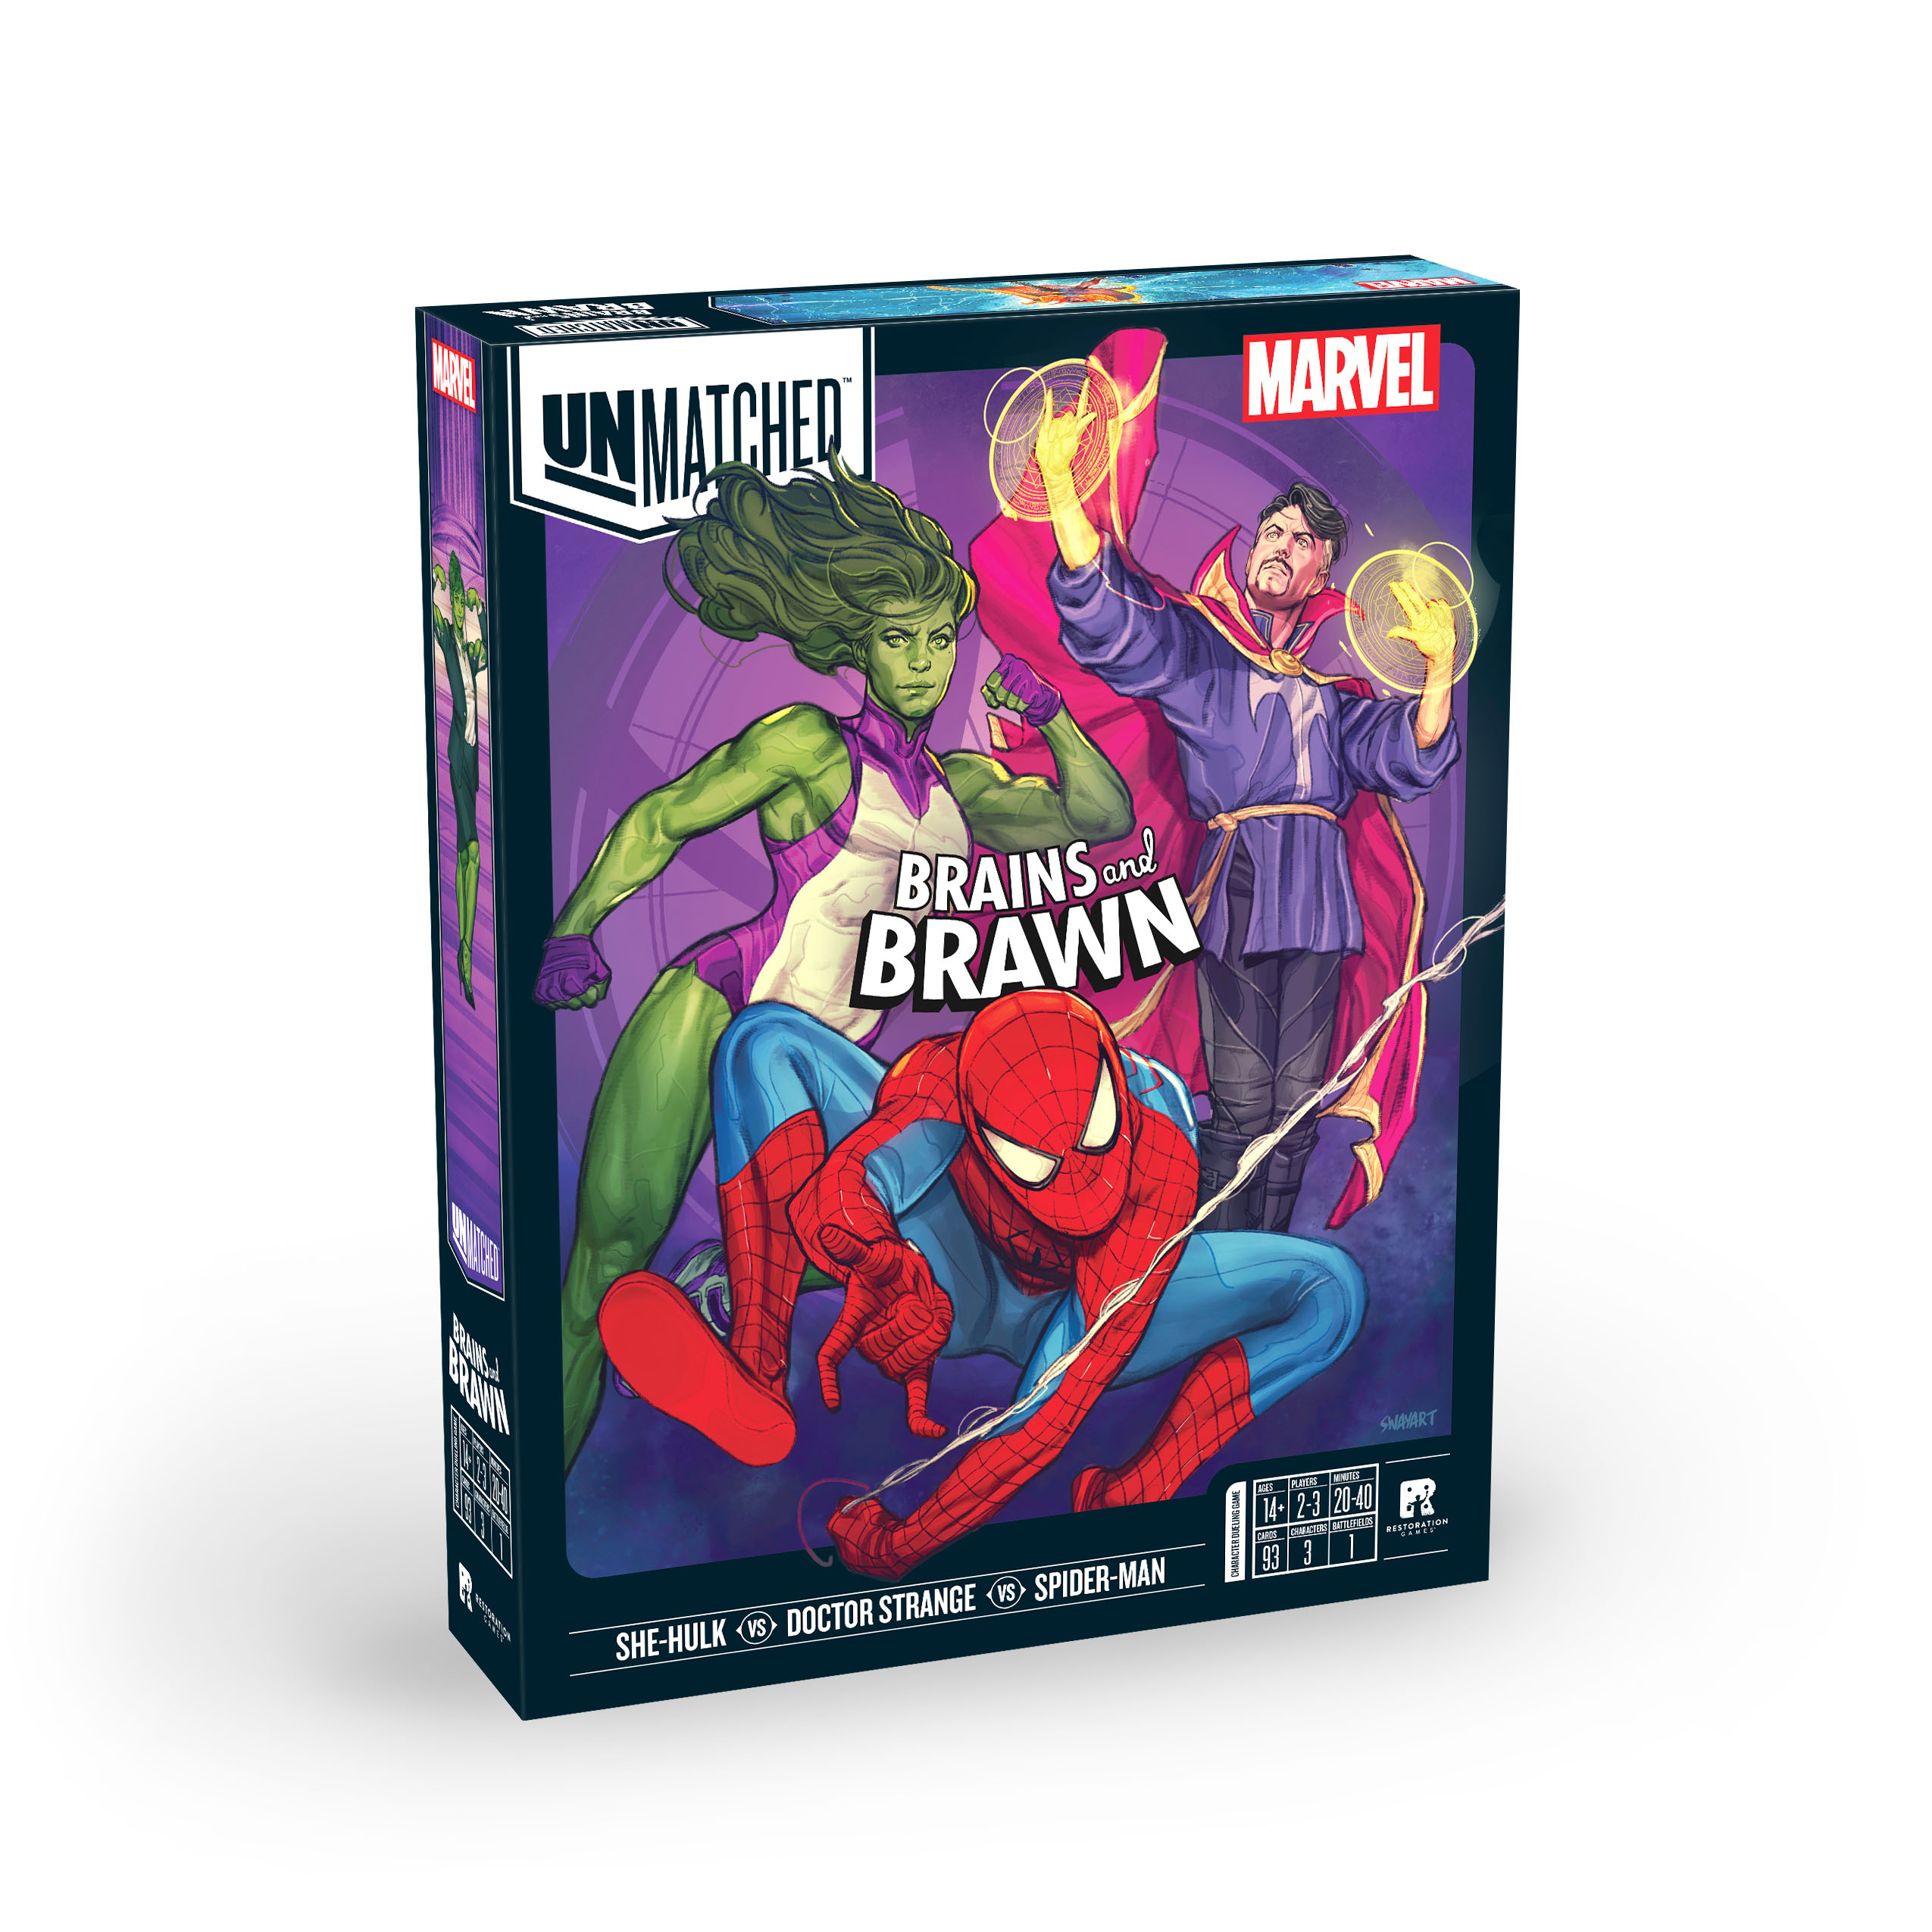 Unmatched: Marvel – Brains and Brawns